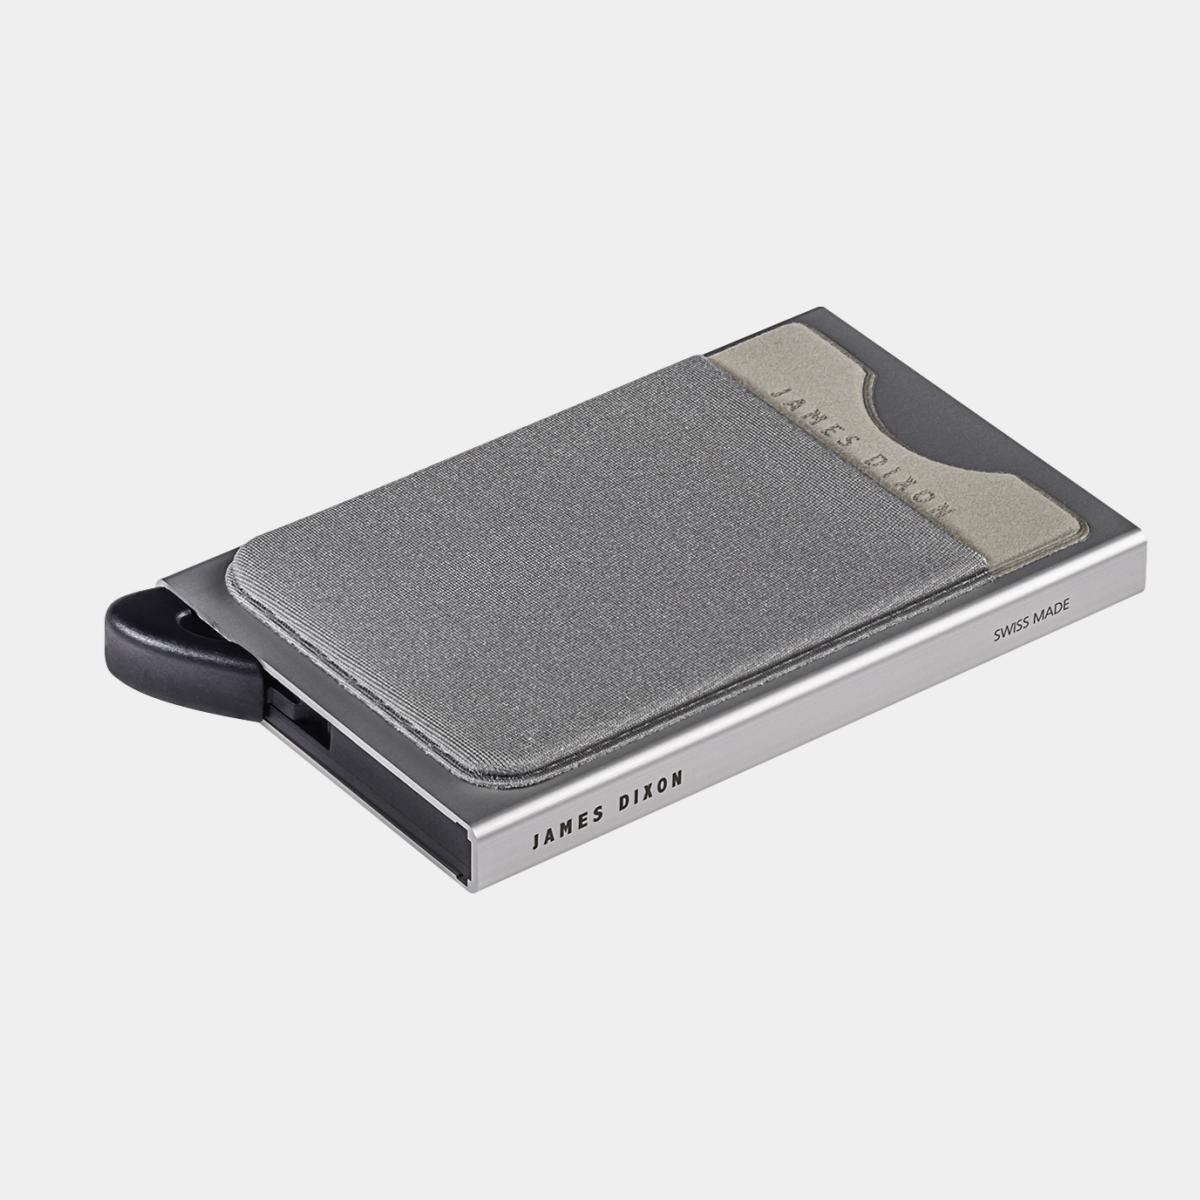 jd0068 james dixon extra cards grey pocket on solo card holder inclined